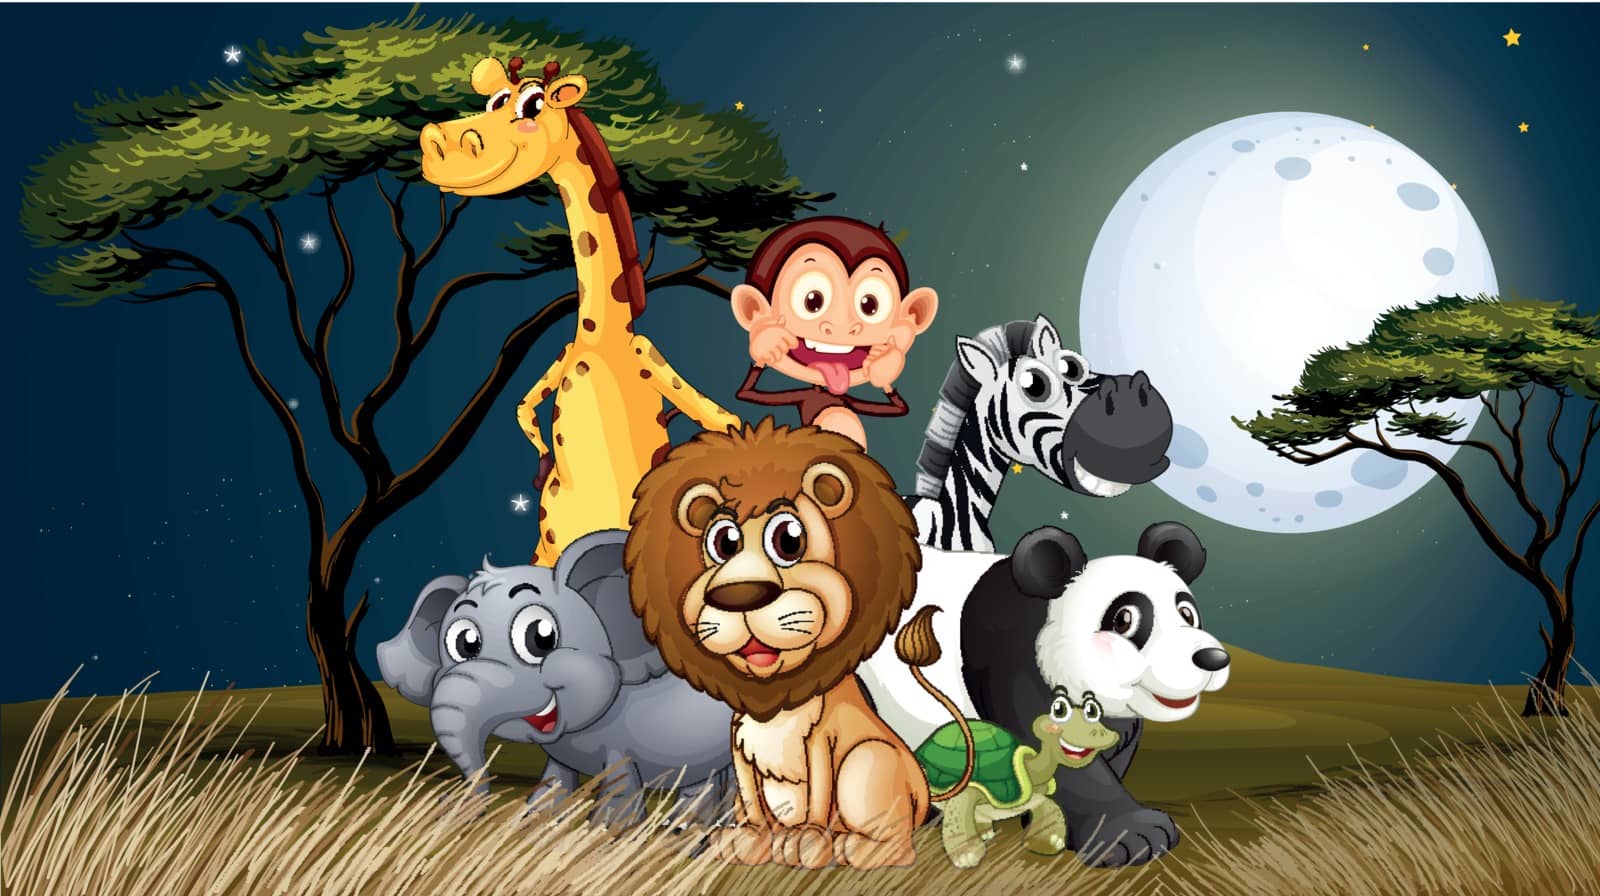 Illustration of a group of playful animals under the bright fullmoon